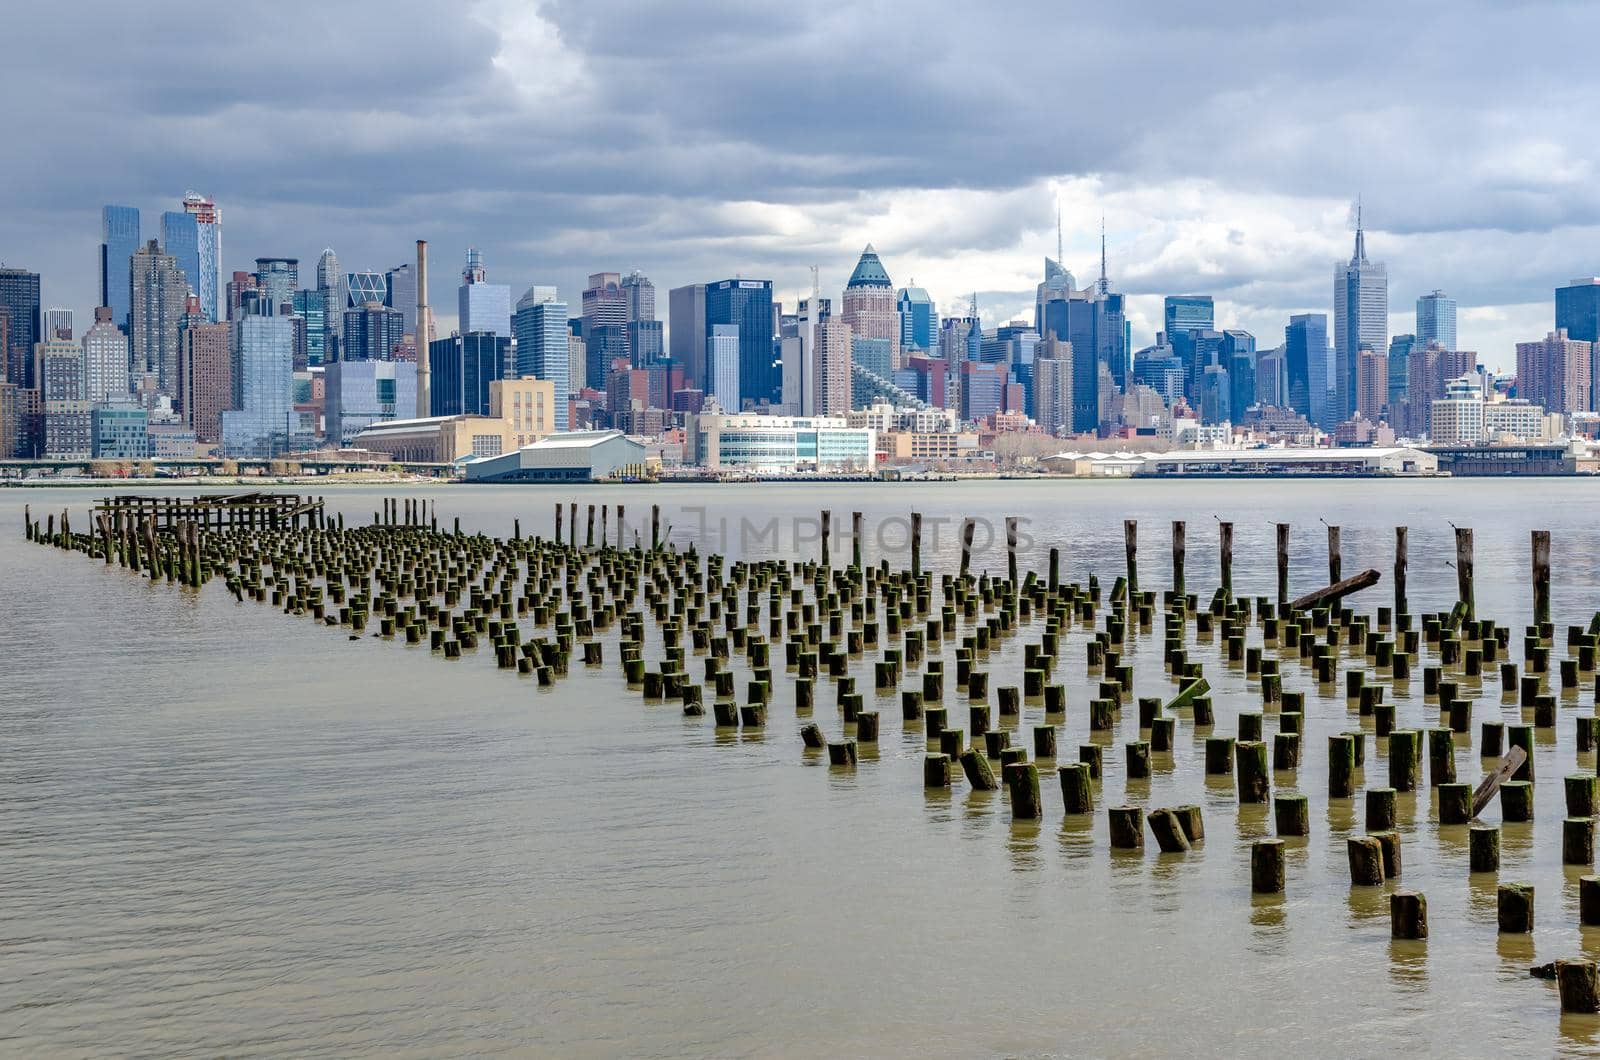 View of Manhattan, New York City with Hudson river and old landing stage in front by bildgigant